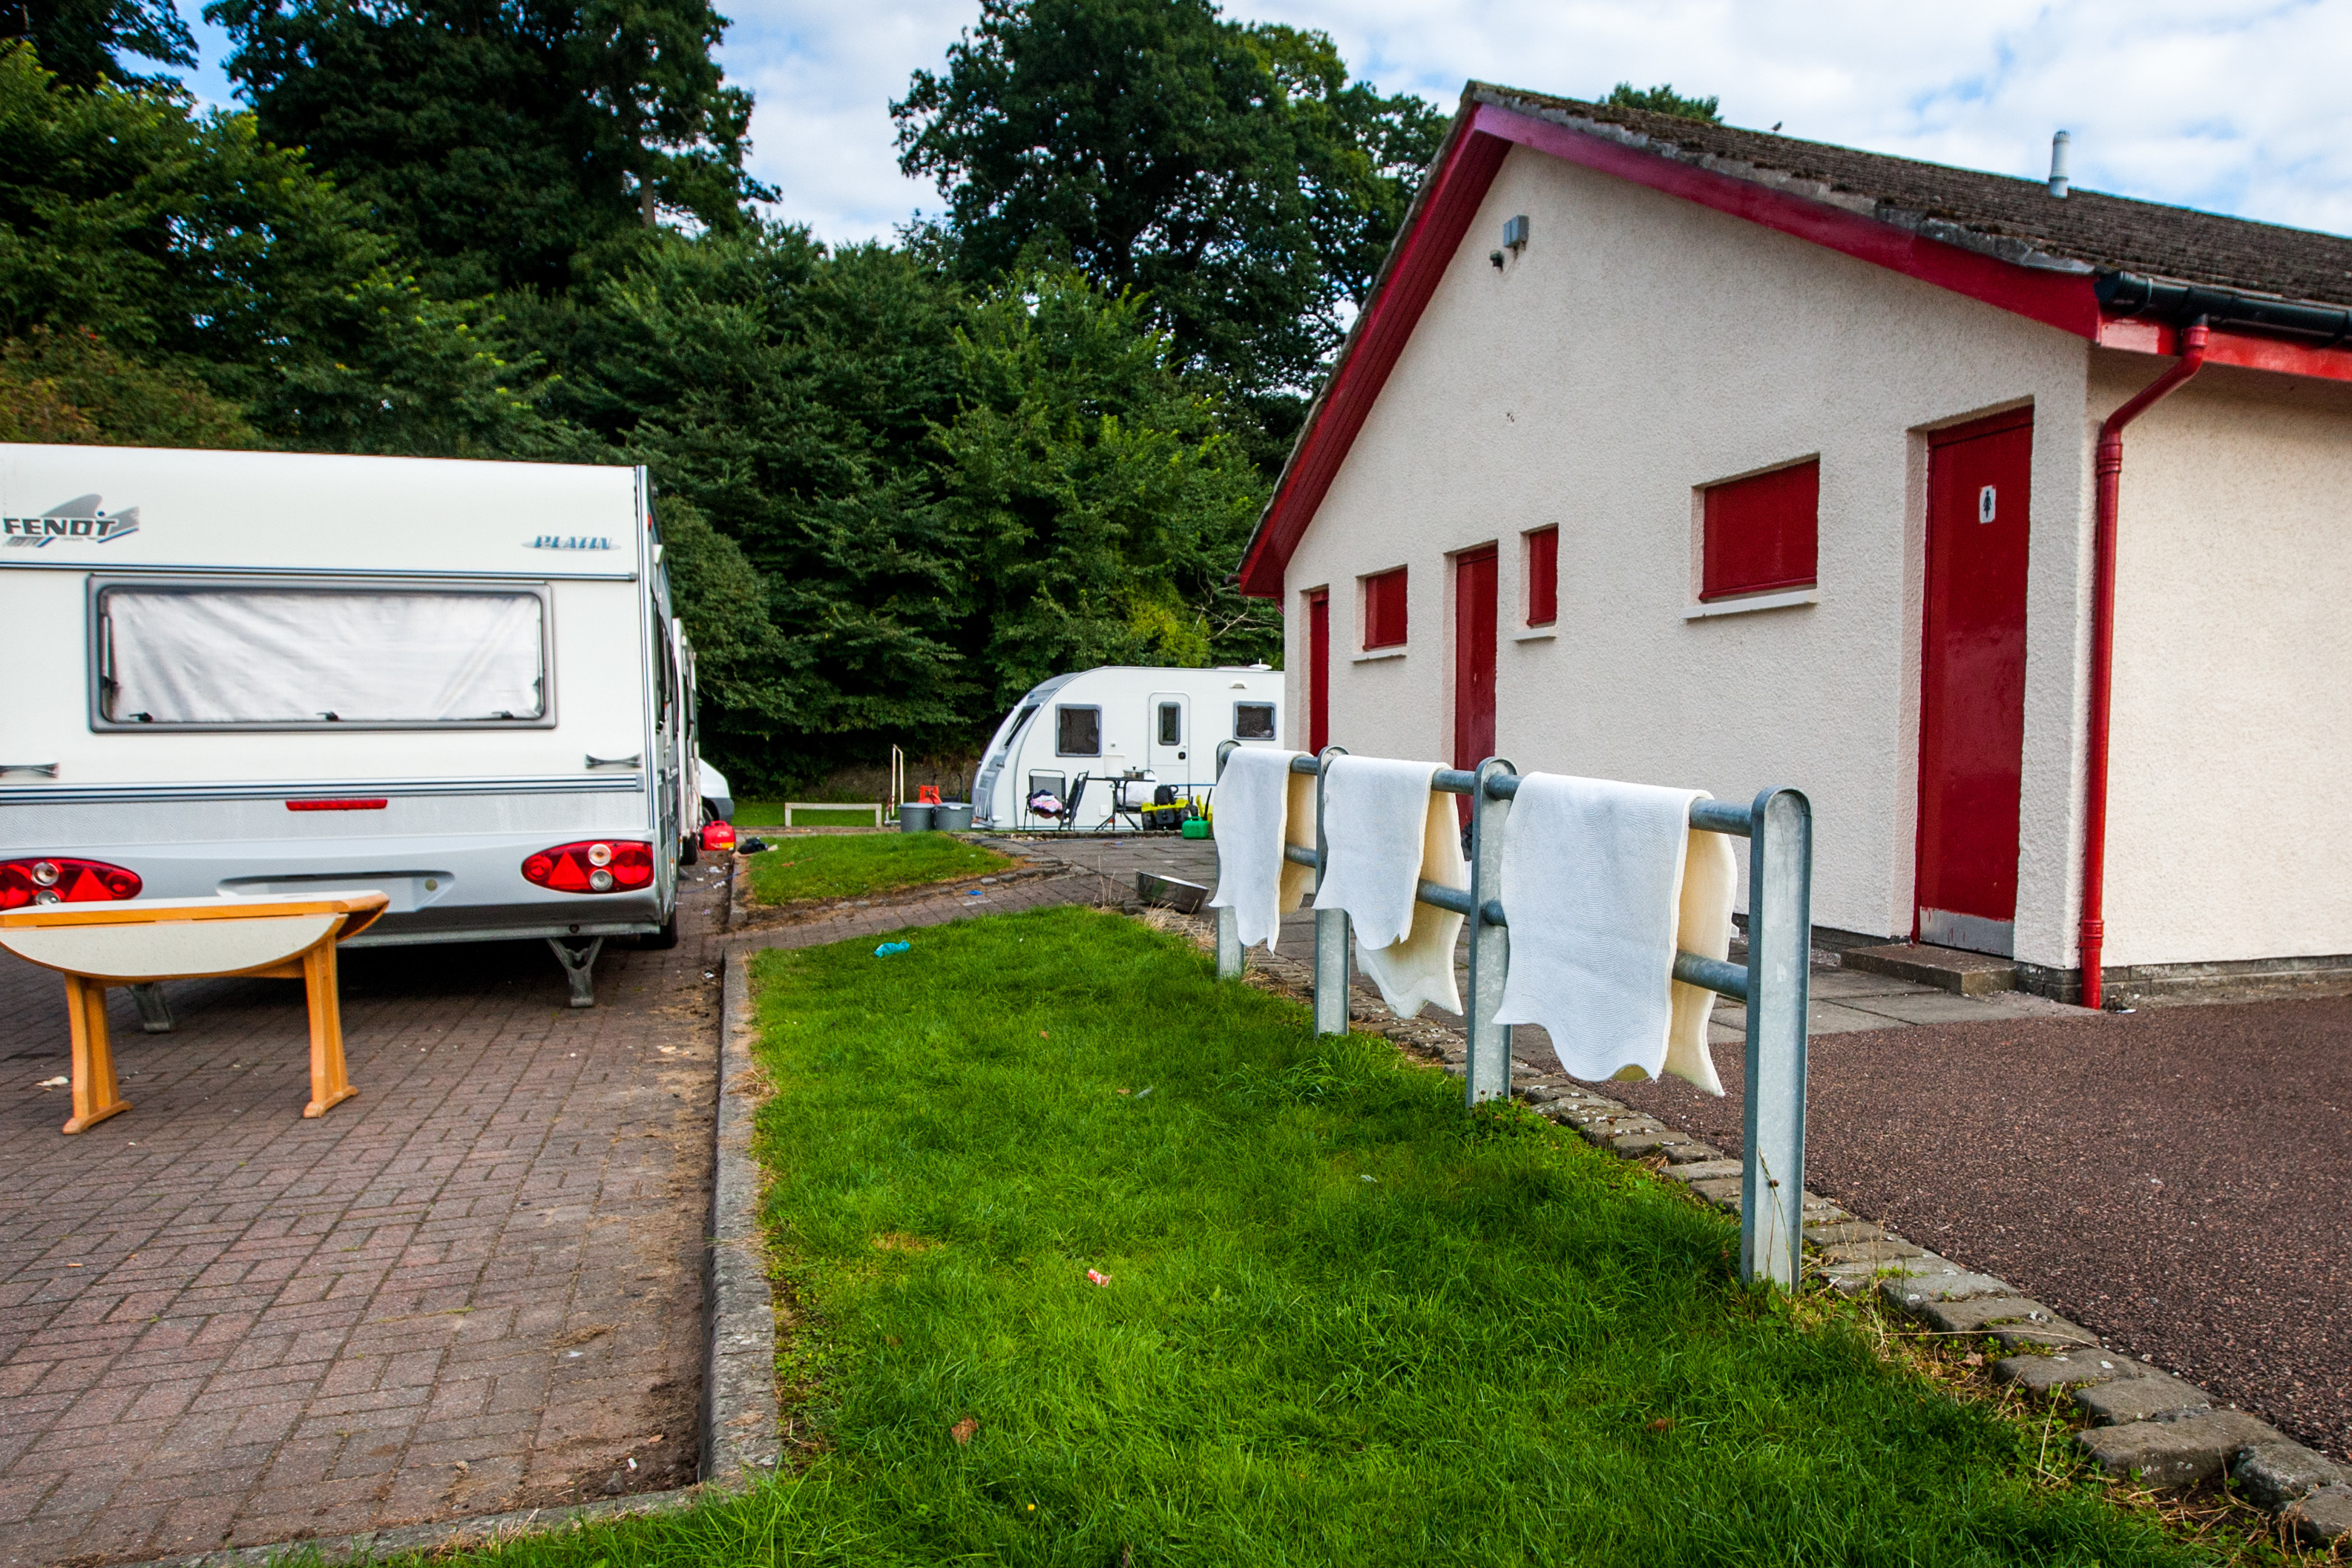 The traveller site surrounding the football club's changing rooms at Davie Park.